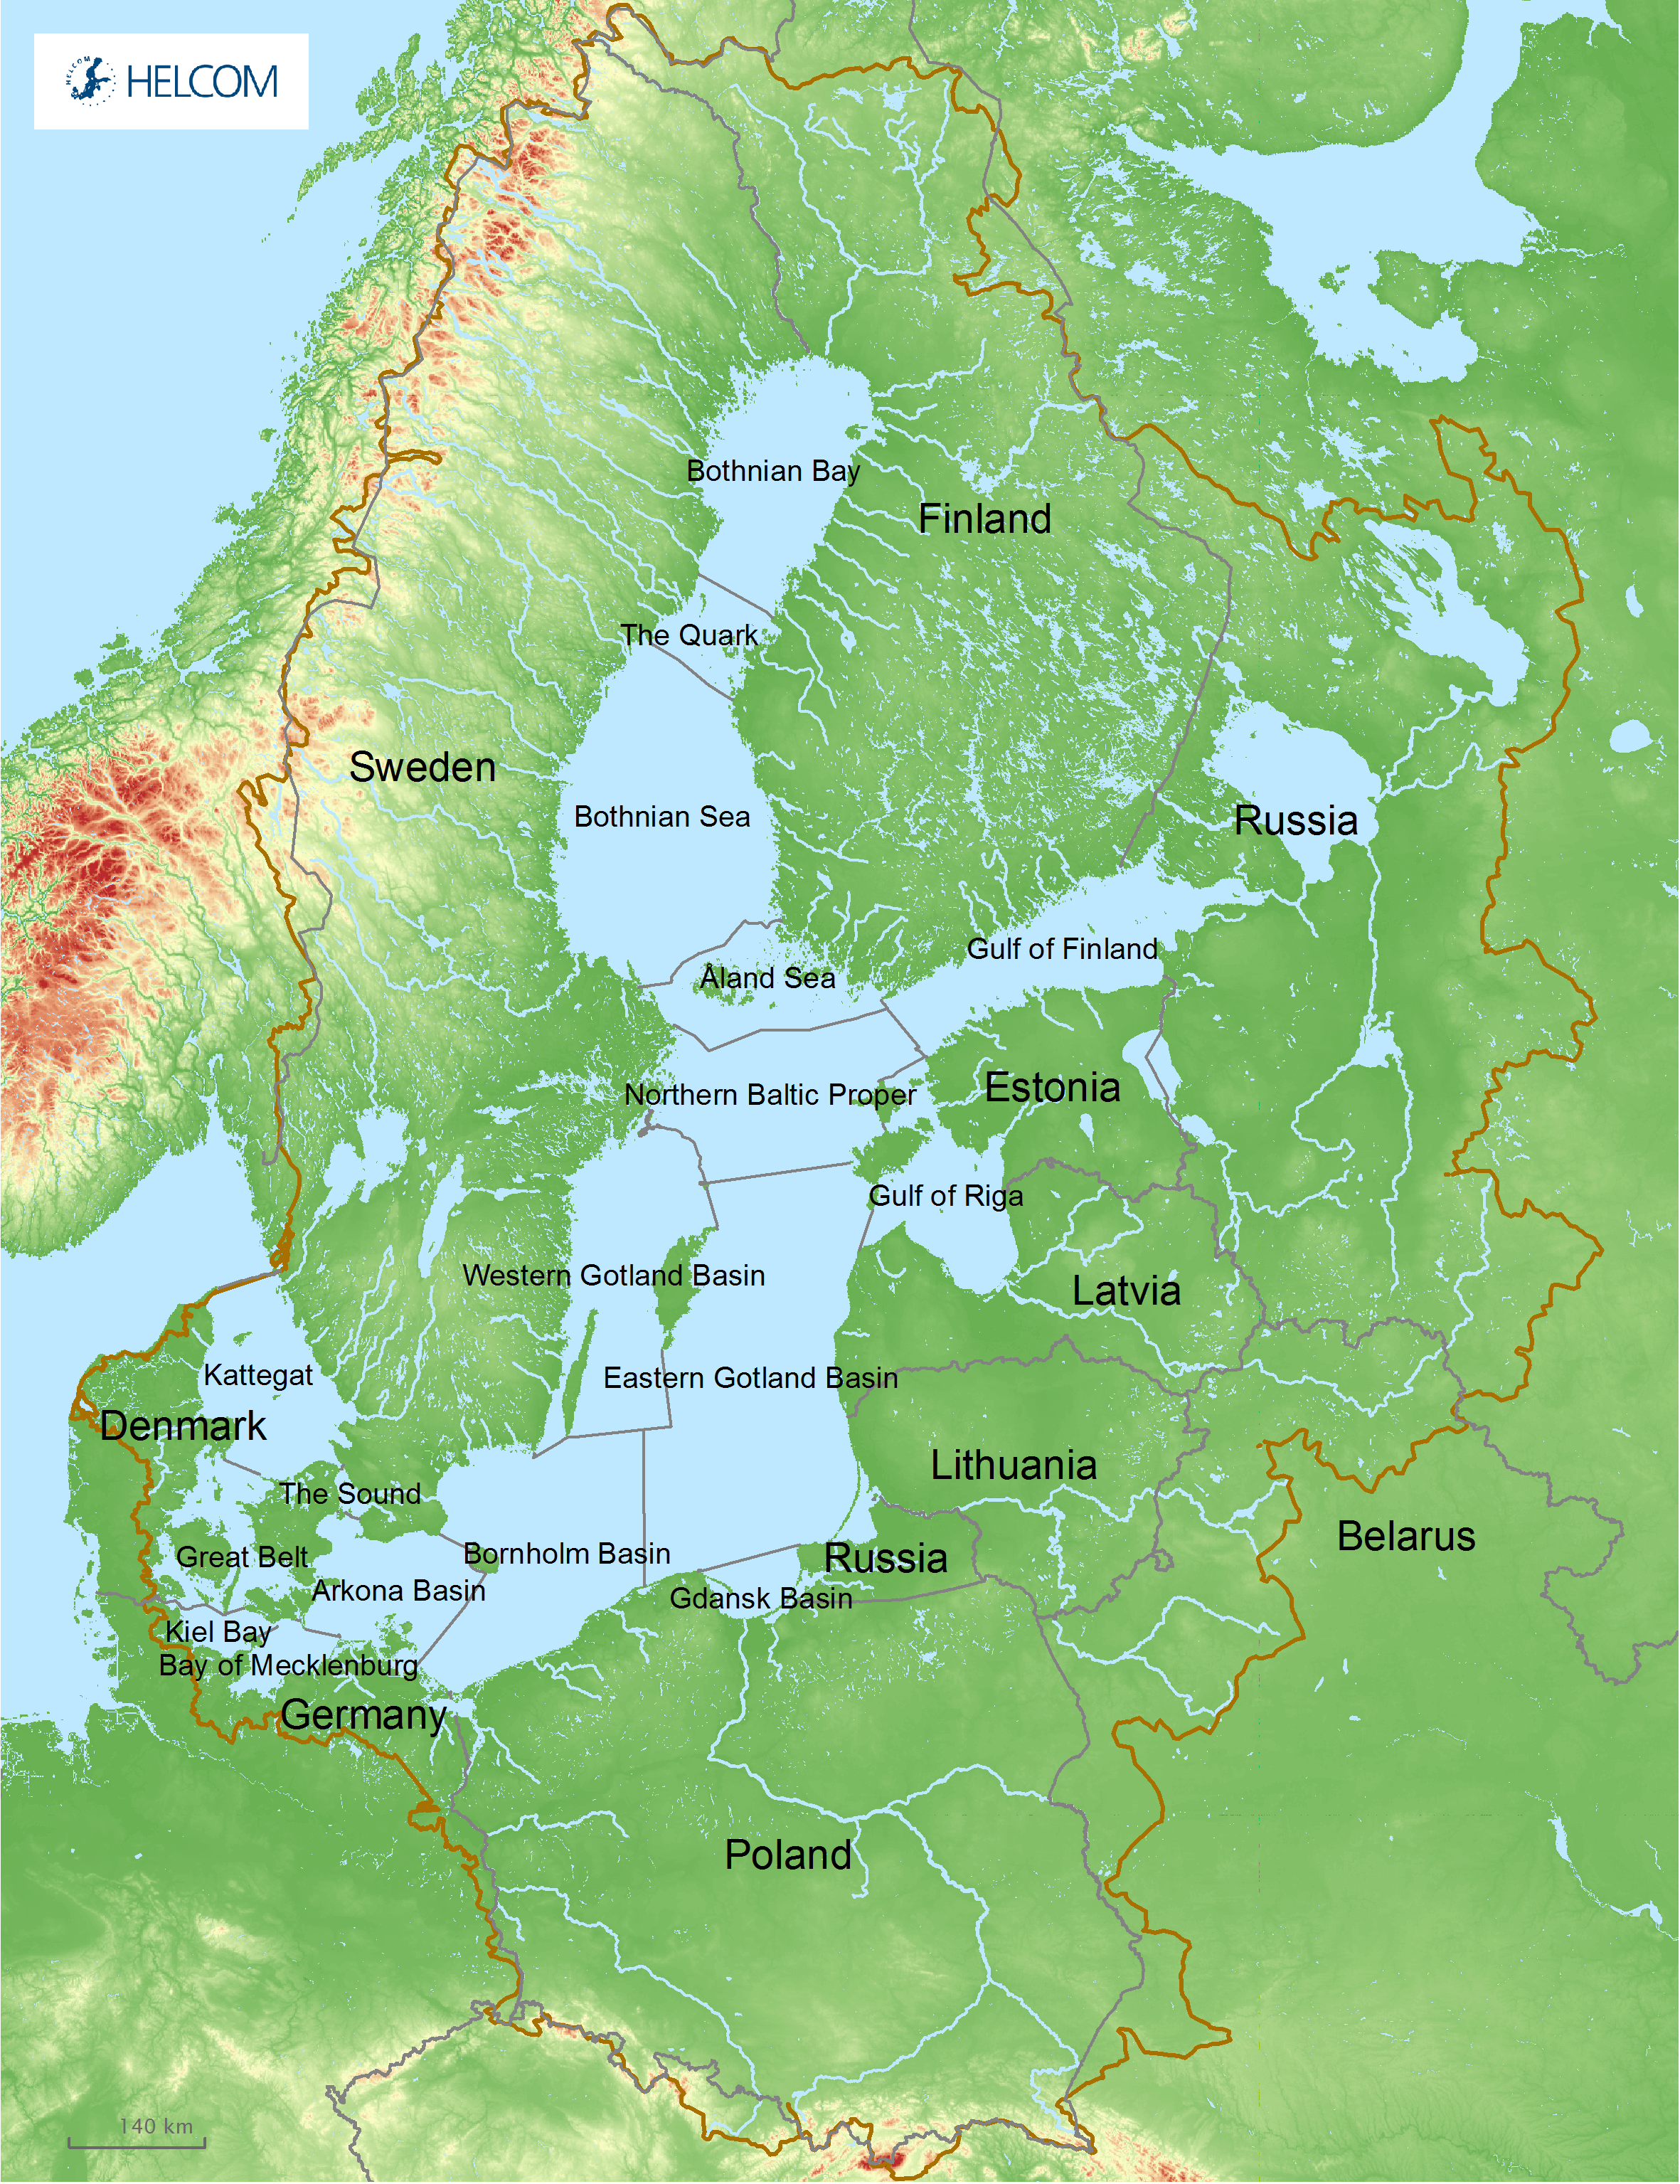 Figure 1.1. The Baltic Sea Is Surrounded By Nine Countries, Covers An Area Of Around 420,000 Km2, And Has A Drainage Area Around Four Times Its Surface Area. Due To Its Strong Salinity Gradient, And Hence Biological Features, The Area Is Sub-divided Into 17 Sub-basins Based On Topography And Hydrology. These Sub-basins Are Also Referred To In The Assessments Made In This Report.